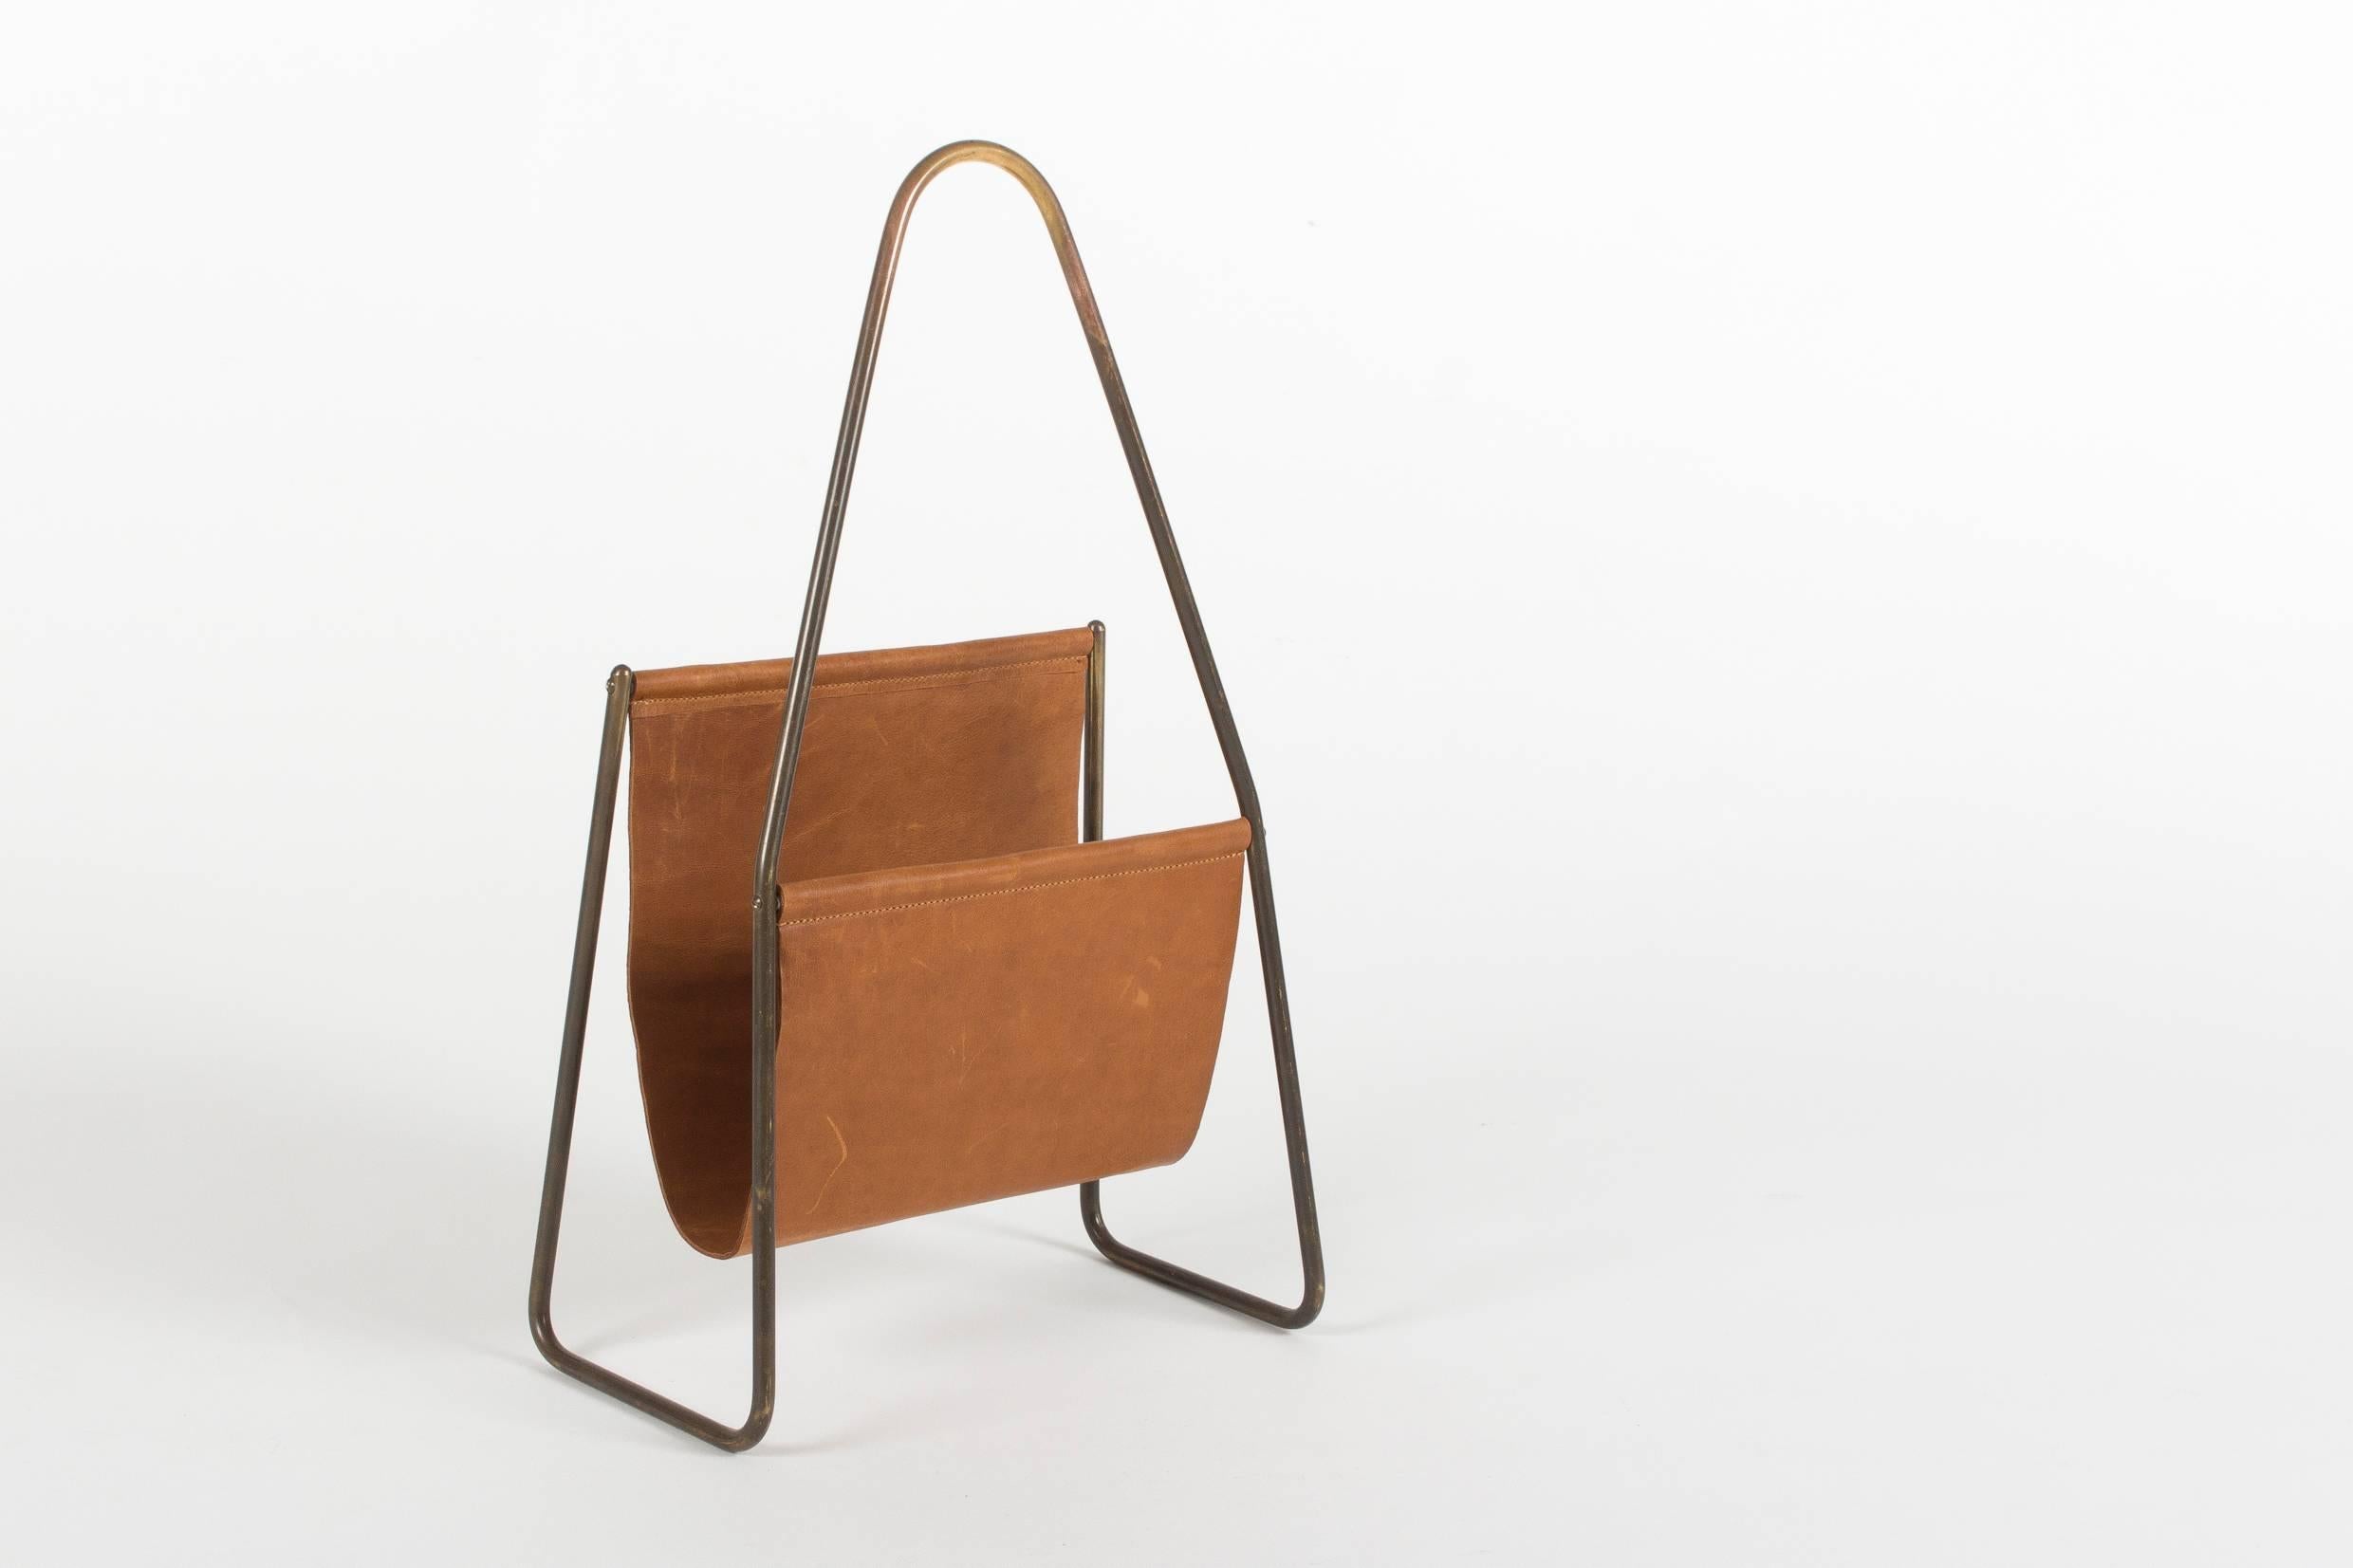 A nicely aged classic from the renown midcentury Auböck workshop. Based in Vienna the family business is famous for their iconic designs of accessories and decorative items.
The presented magazine rack is one of the wider known pieces, elegantly